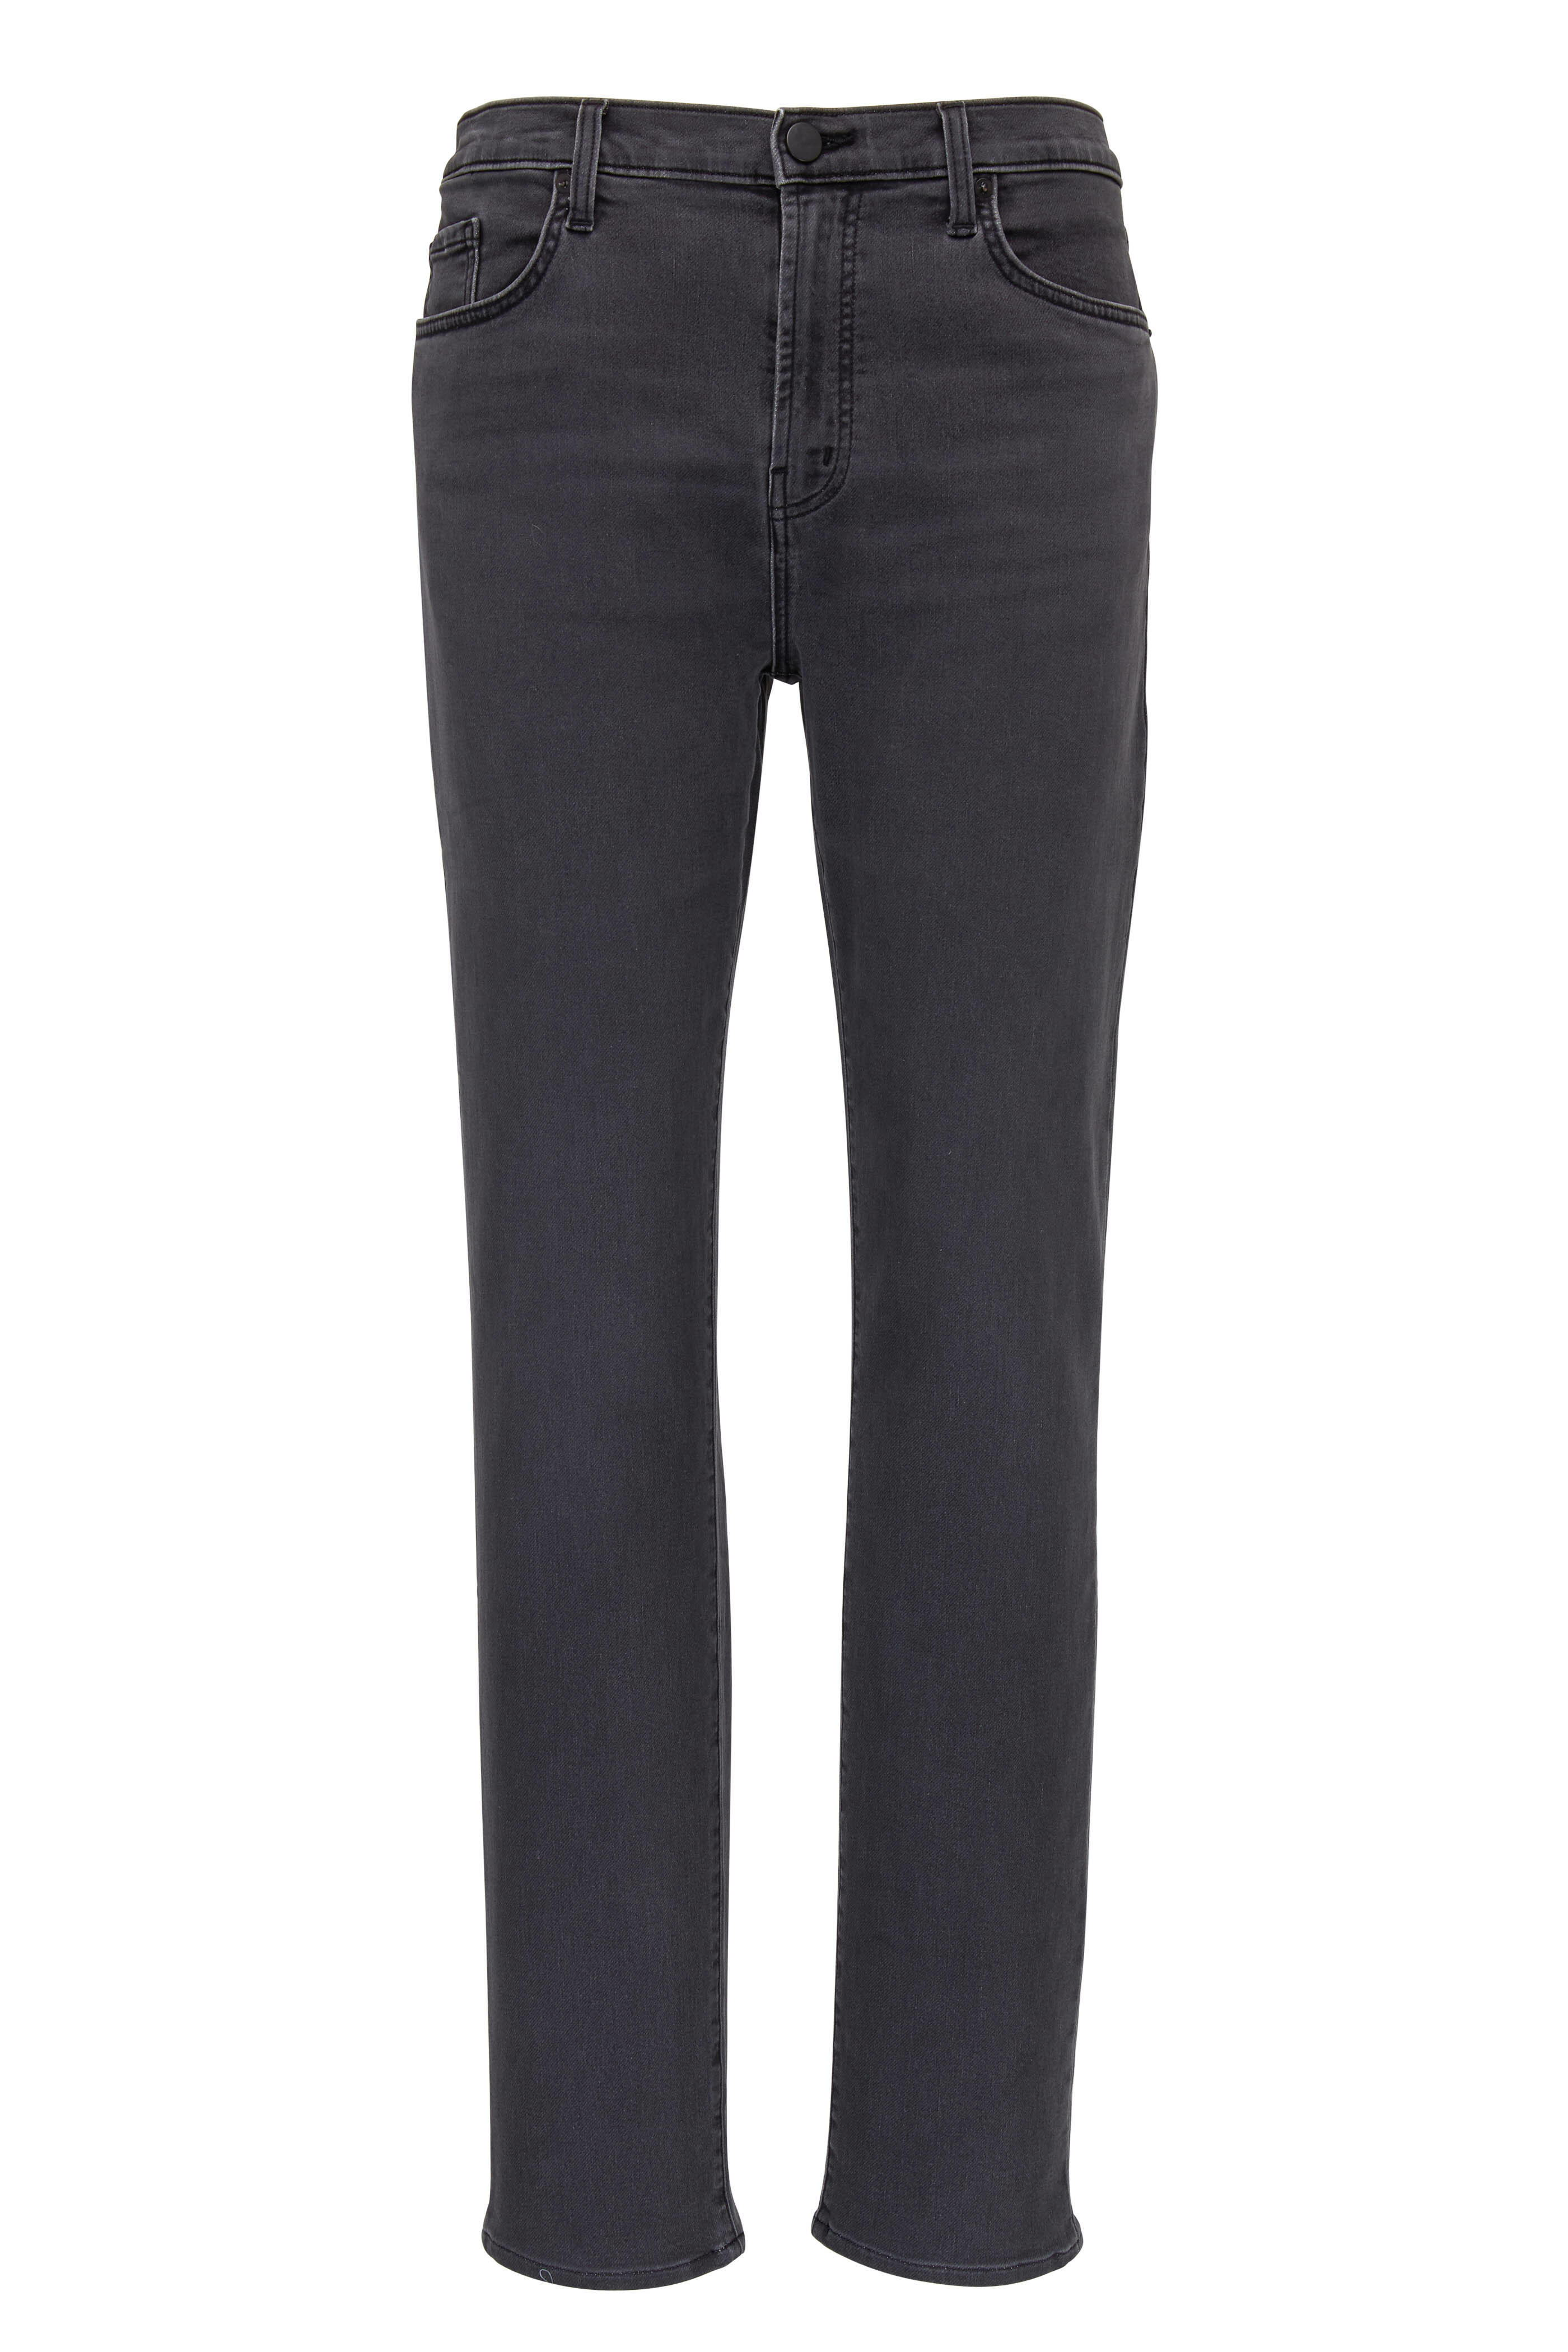 J Brand - Kane Gray French Terry Straight Fit Jean